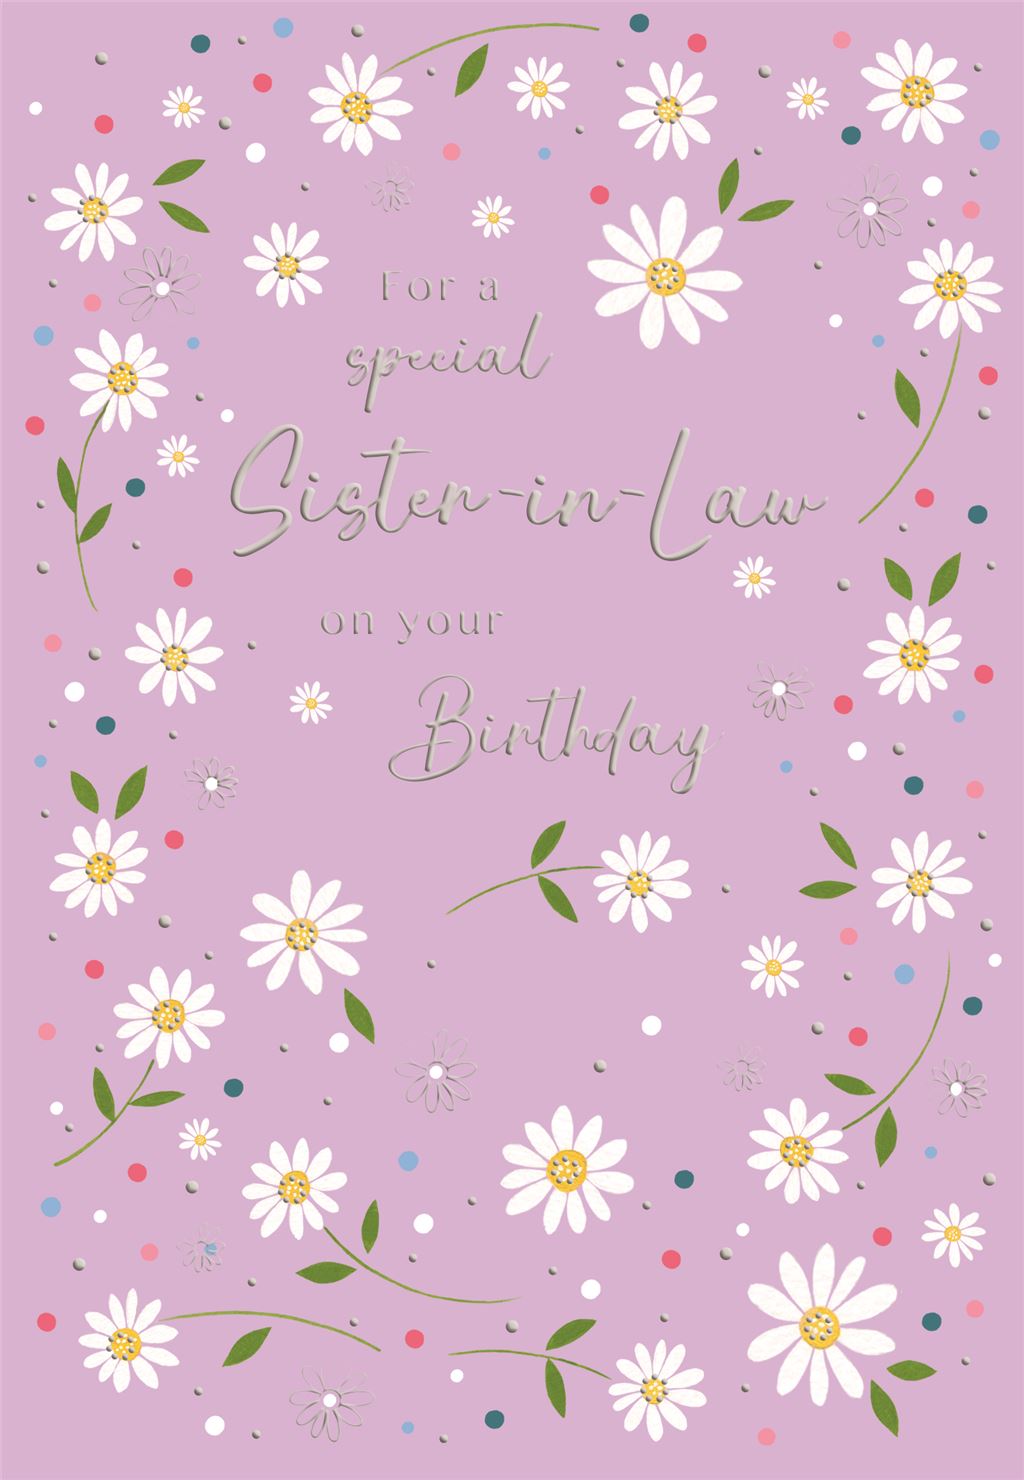 Sister in law birthday card- beautiful flowers